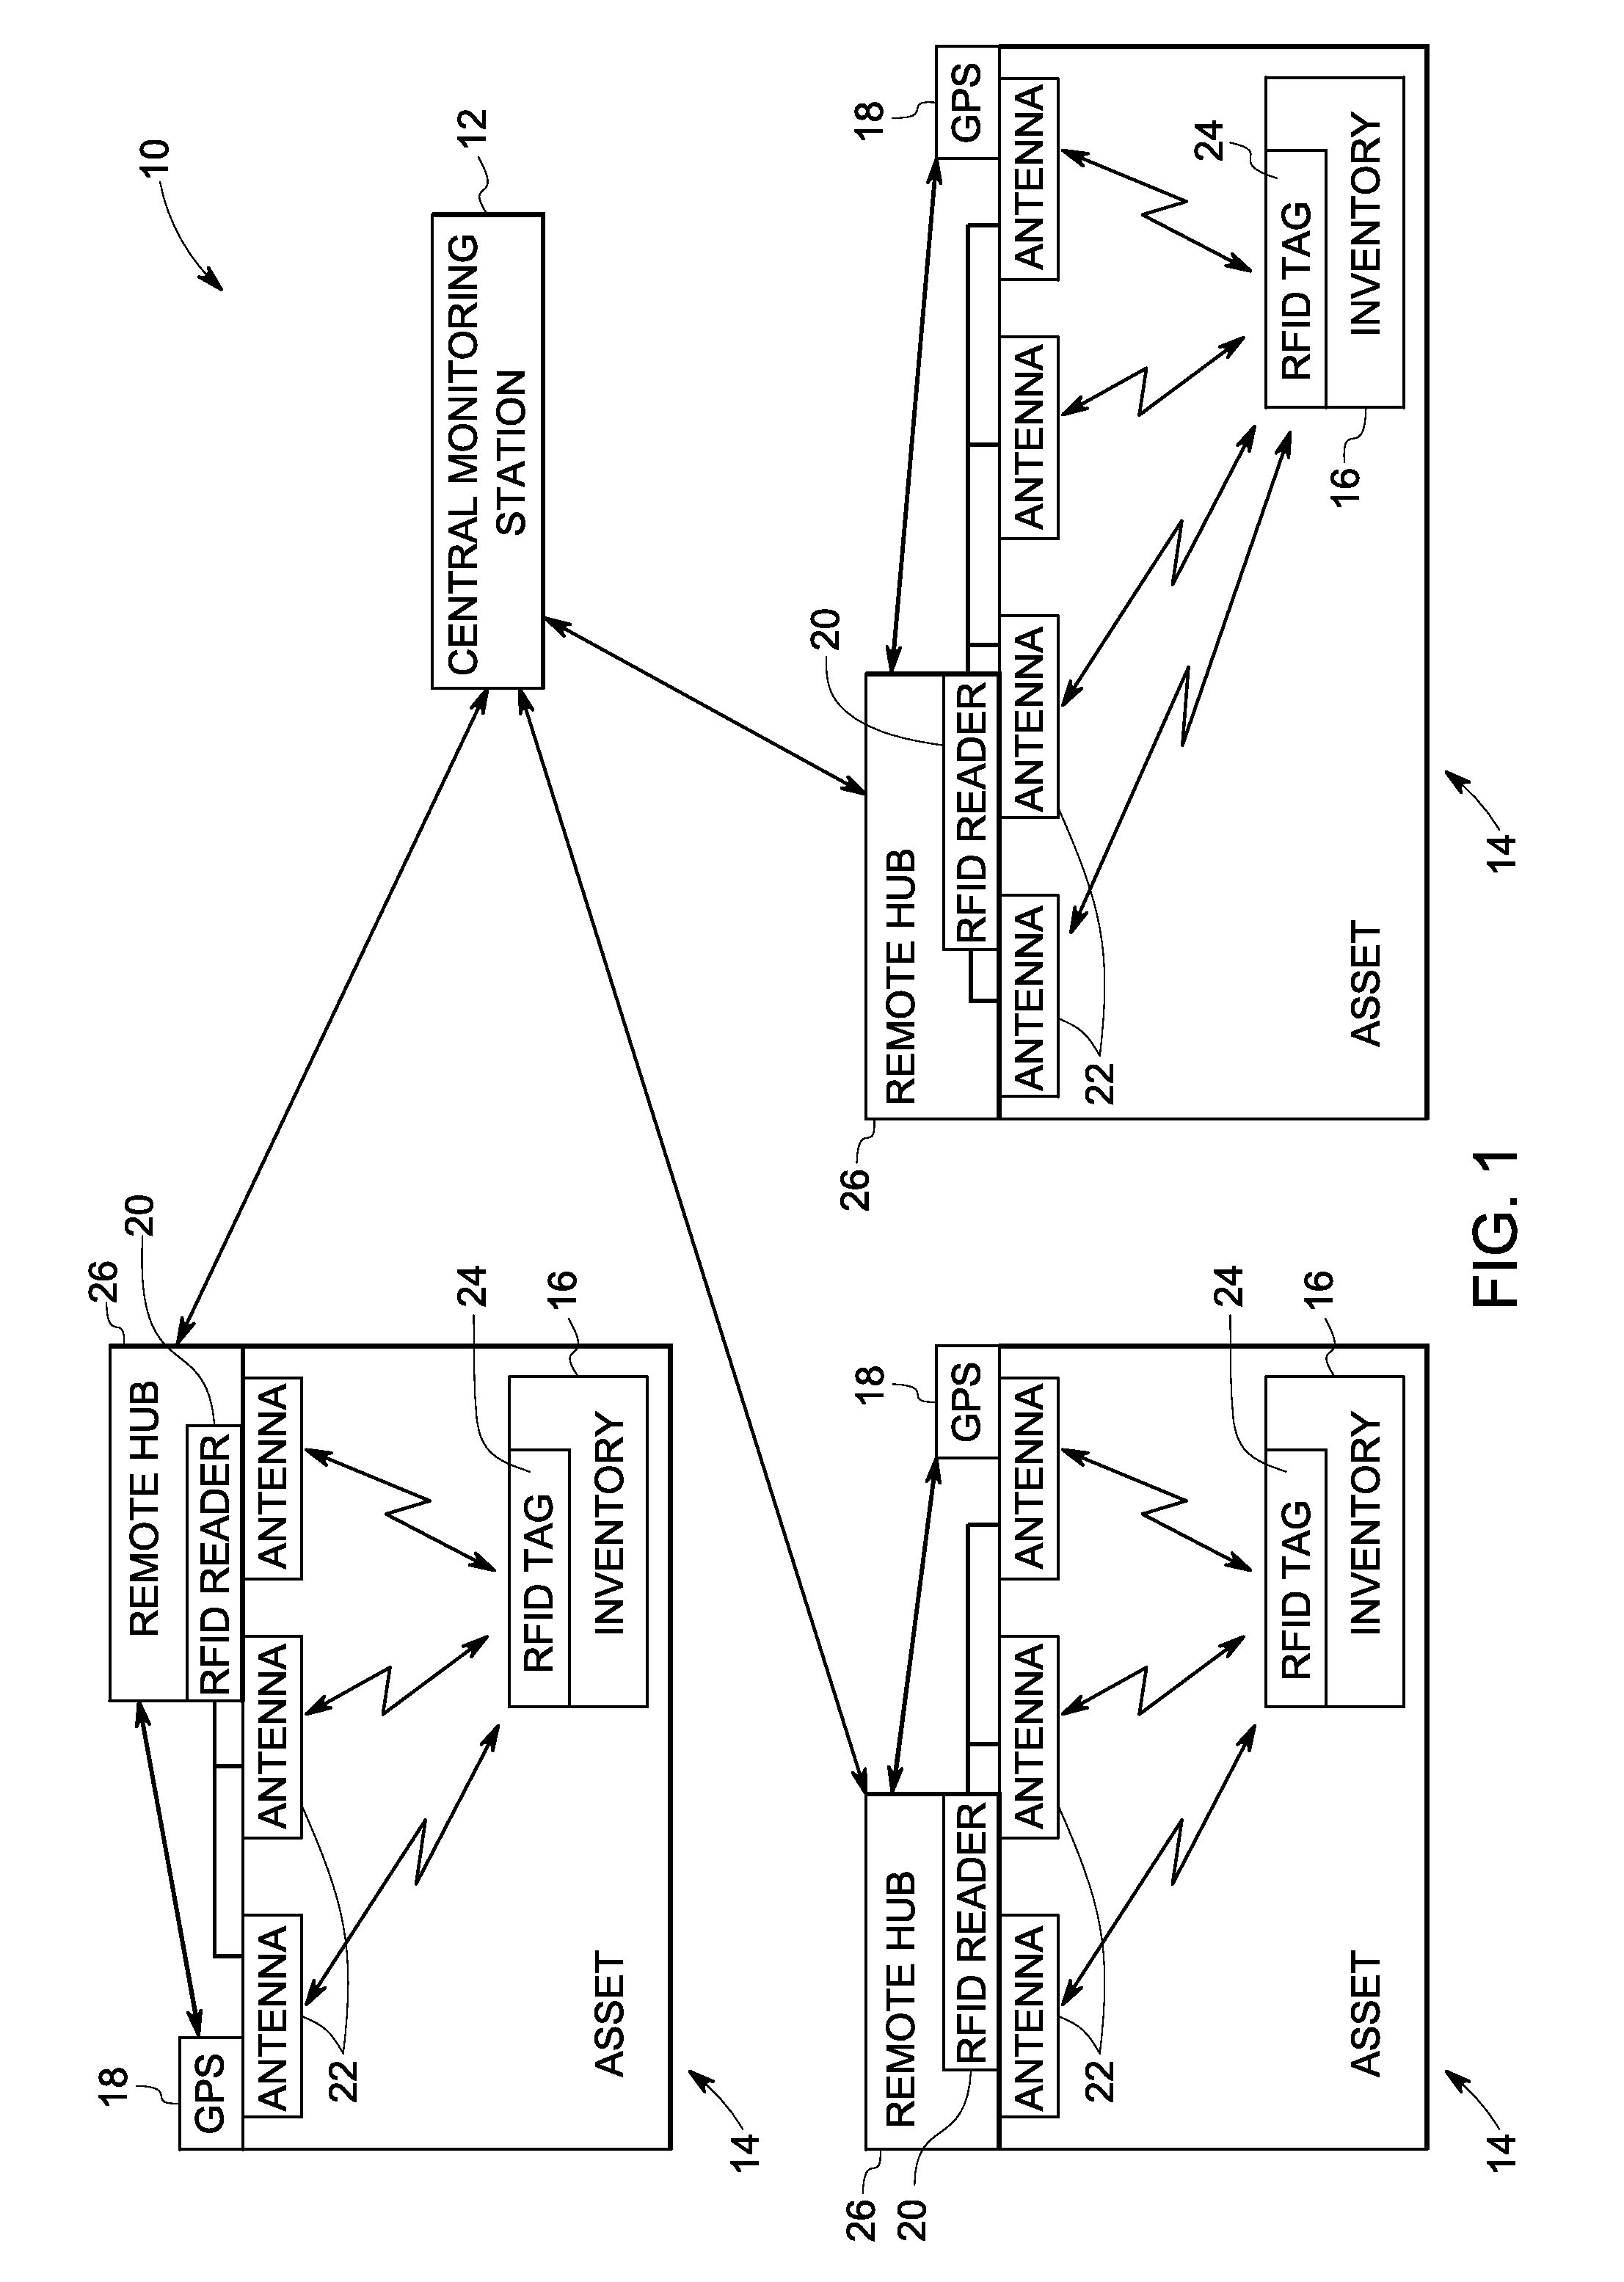 System and method for tracking an inventory within an asset